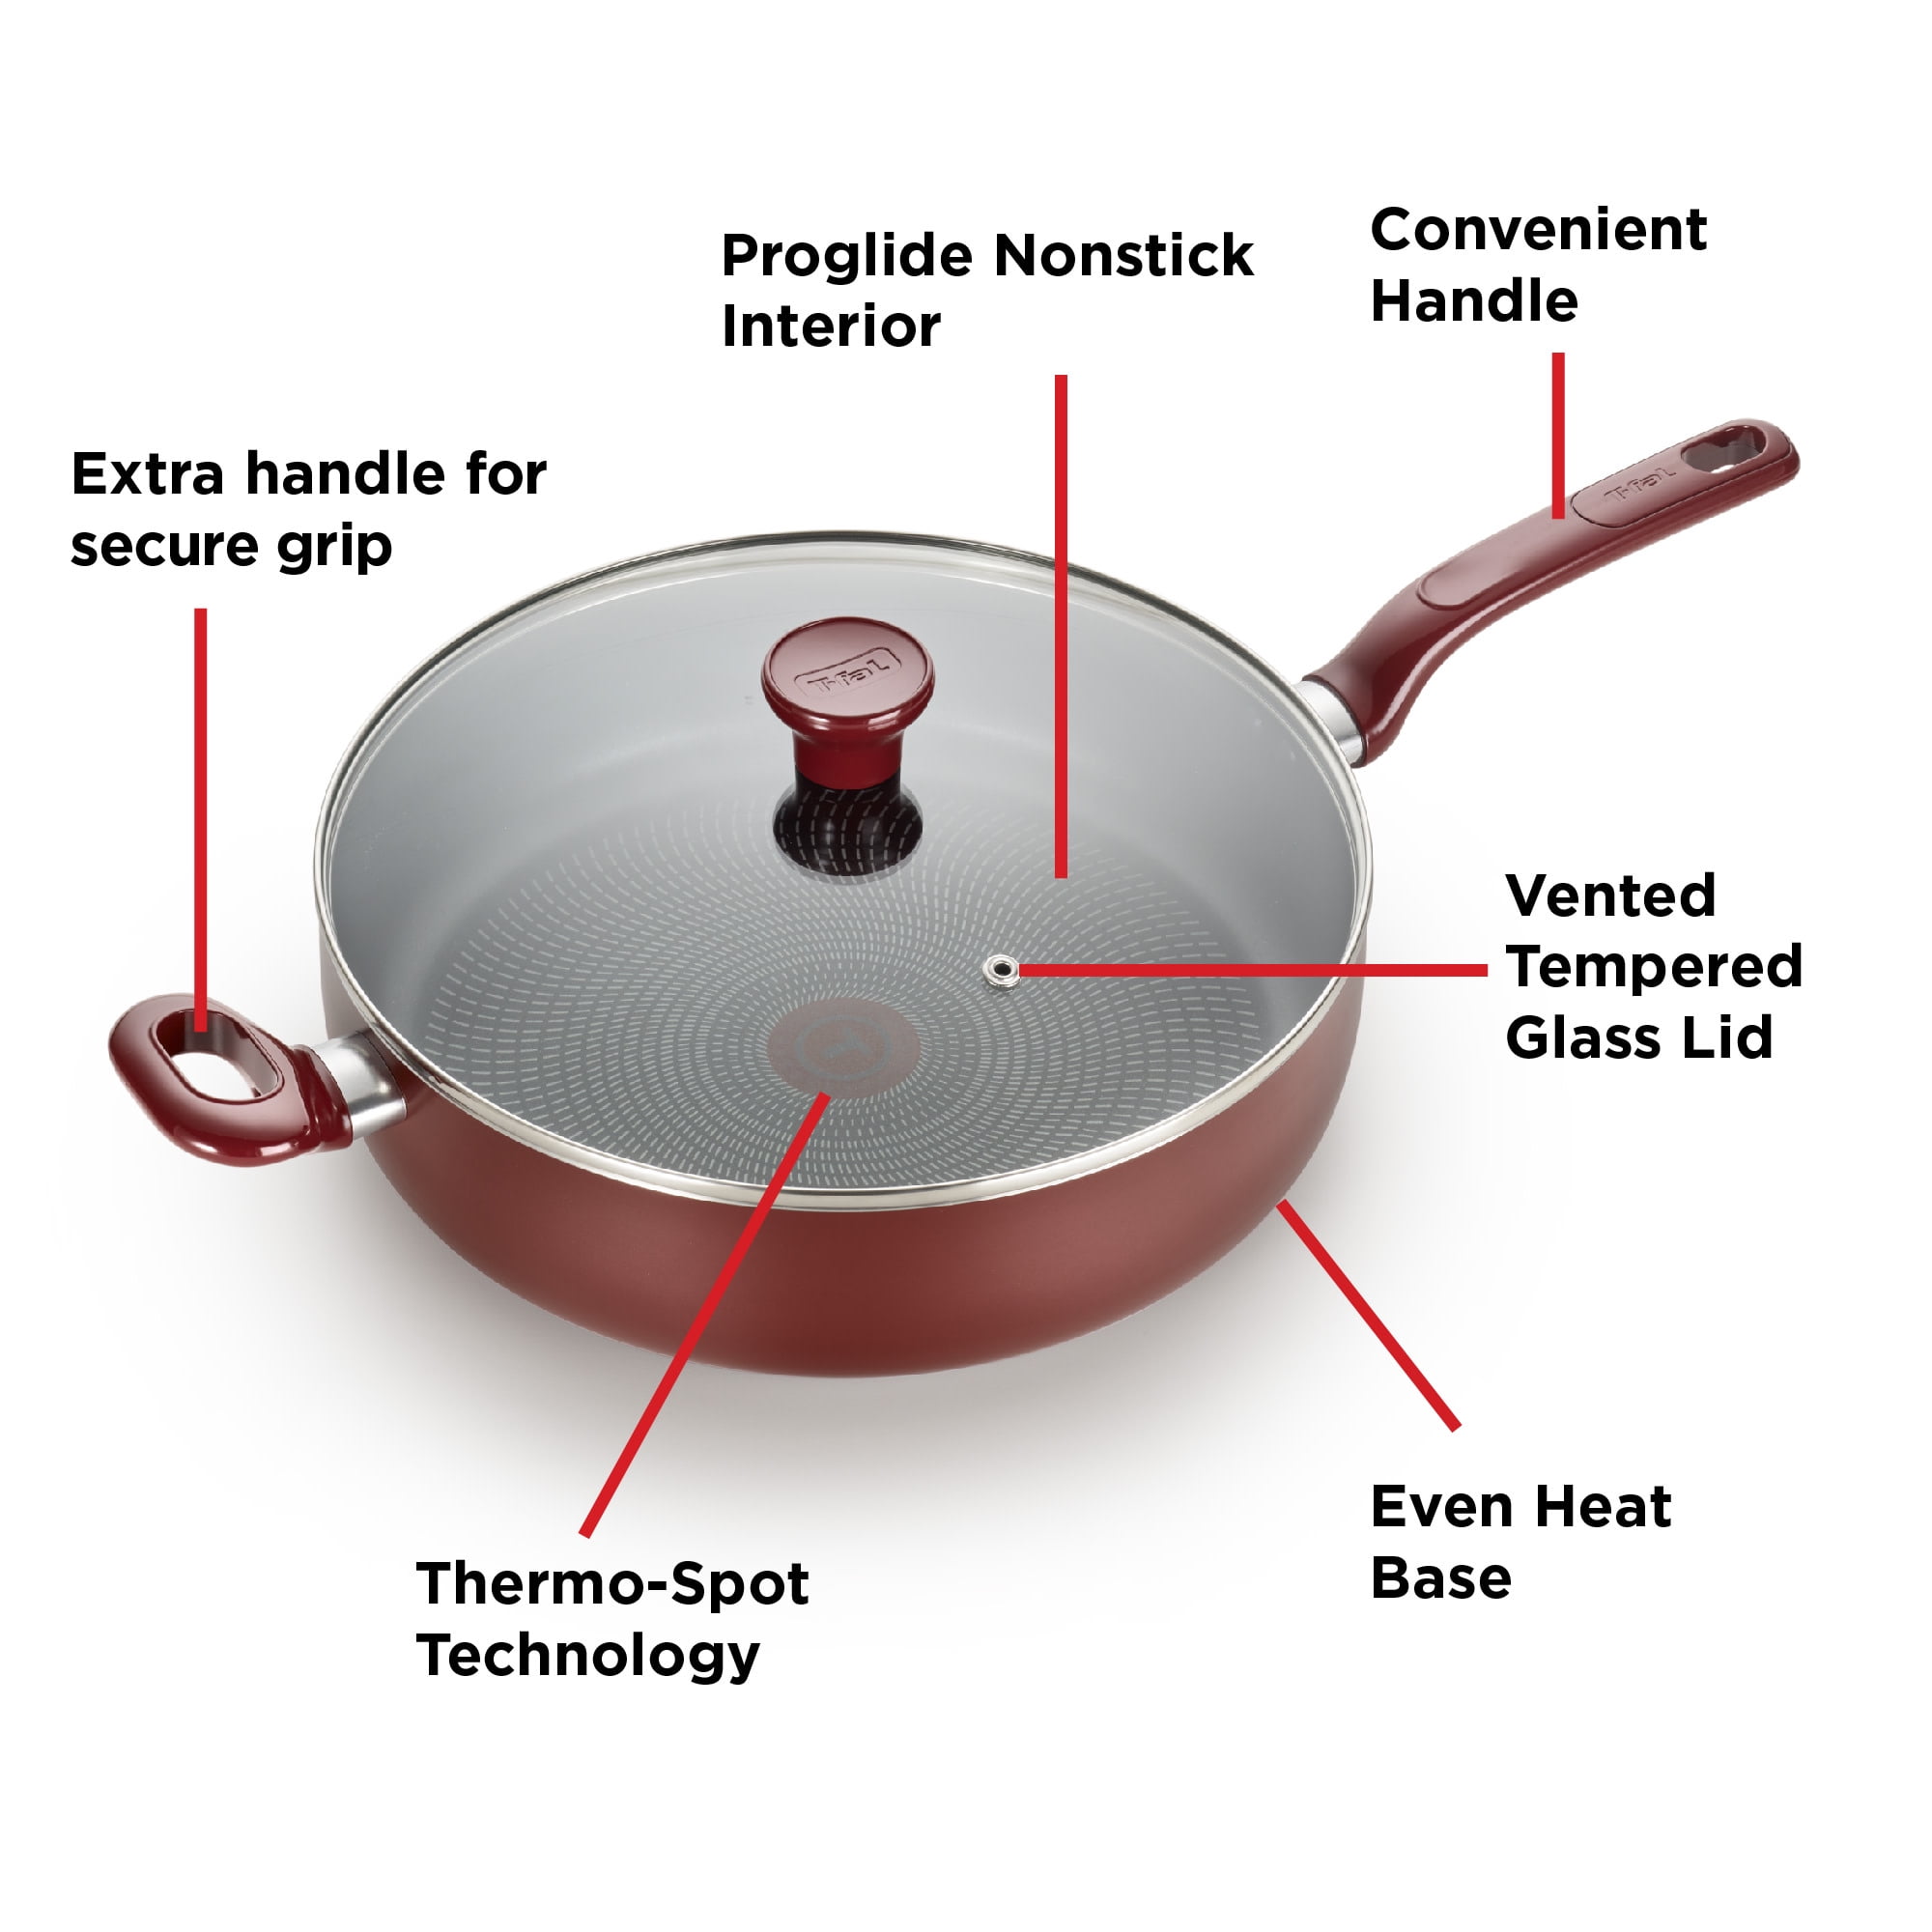 Tramontina EveryDay 5 Qt Aluminum Nonstick Covered Jumbo Cooker – Red 